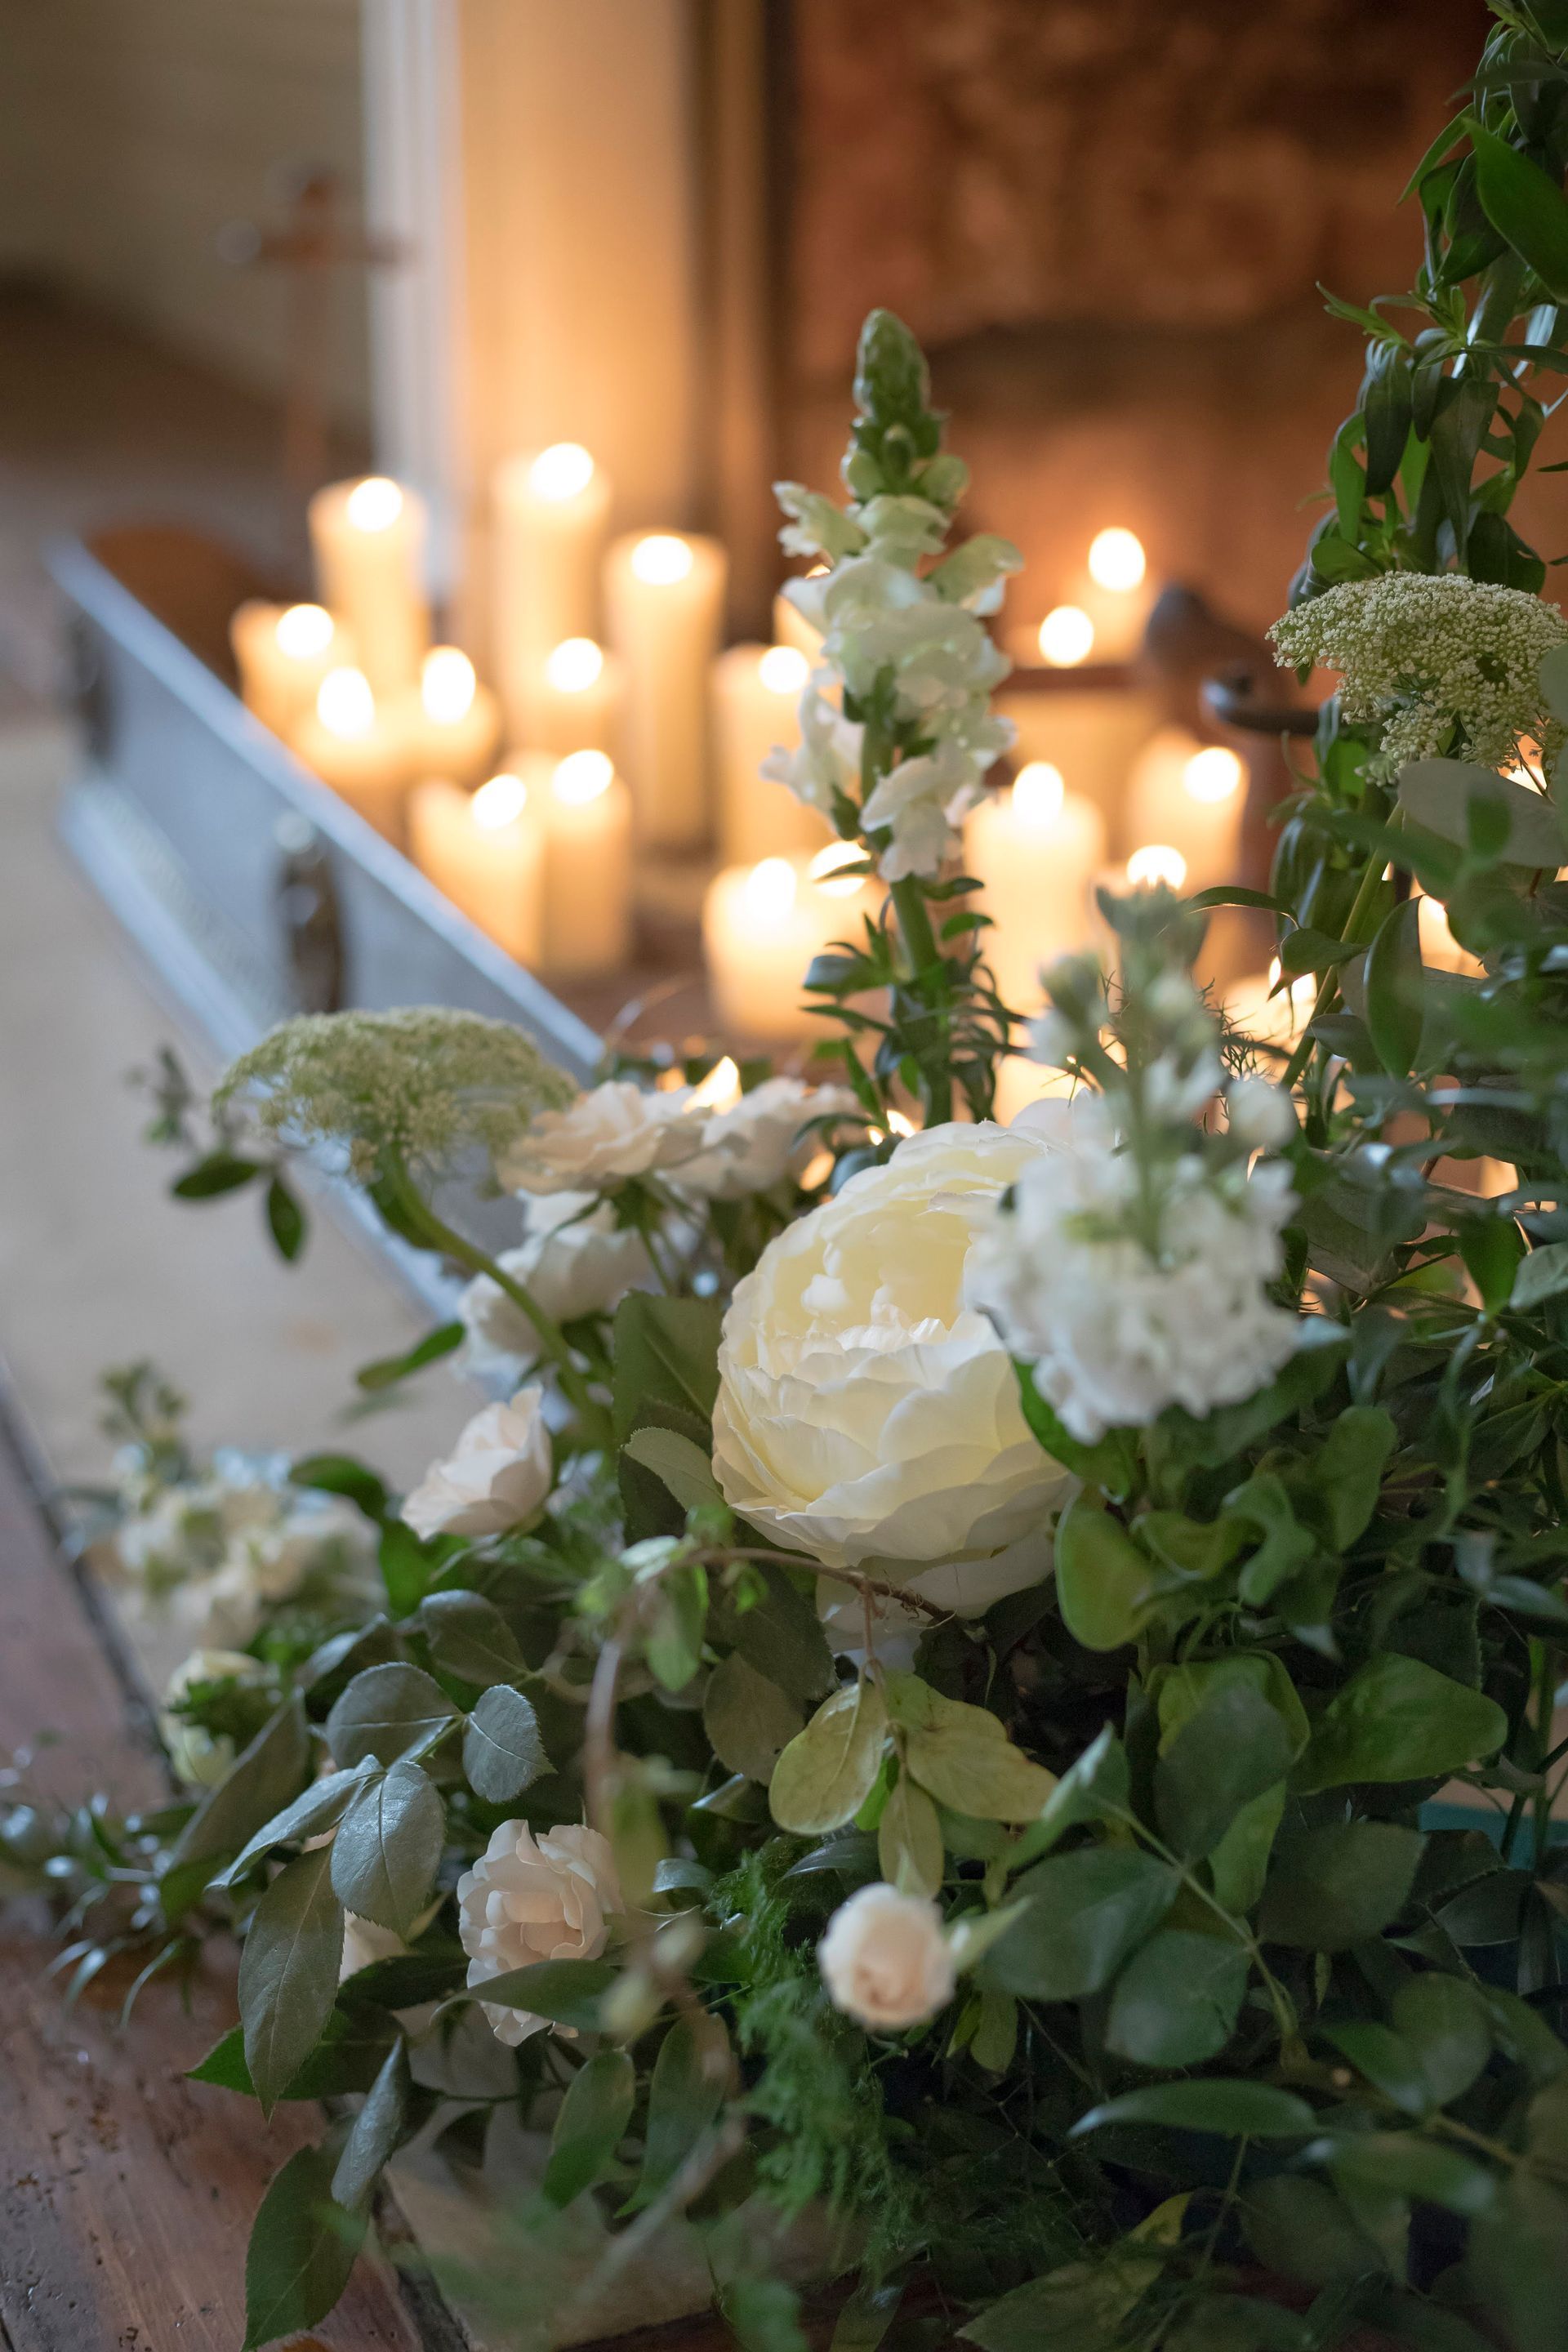 A fireplace filled with cream lit candles with white rose and anemones decorating it